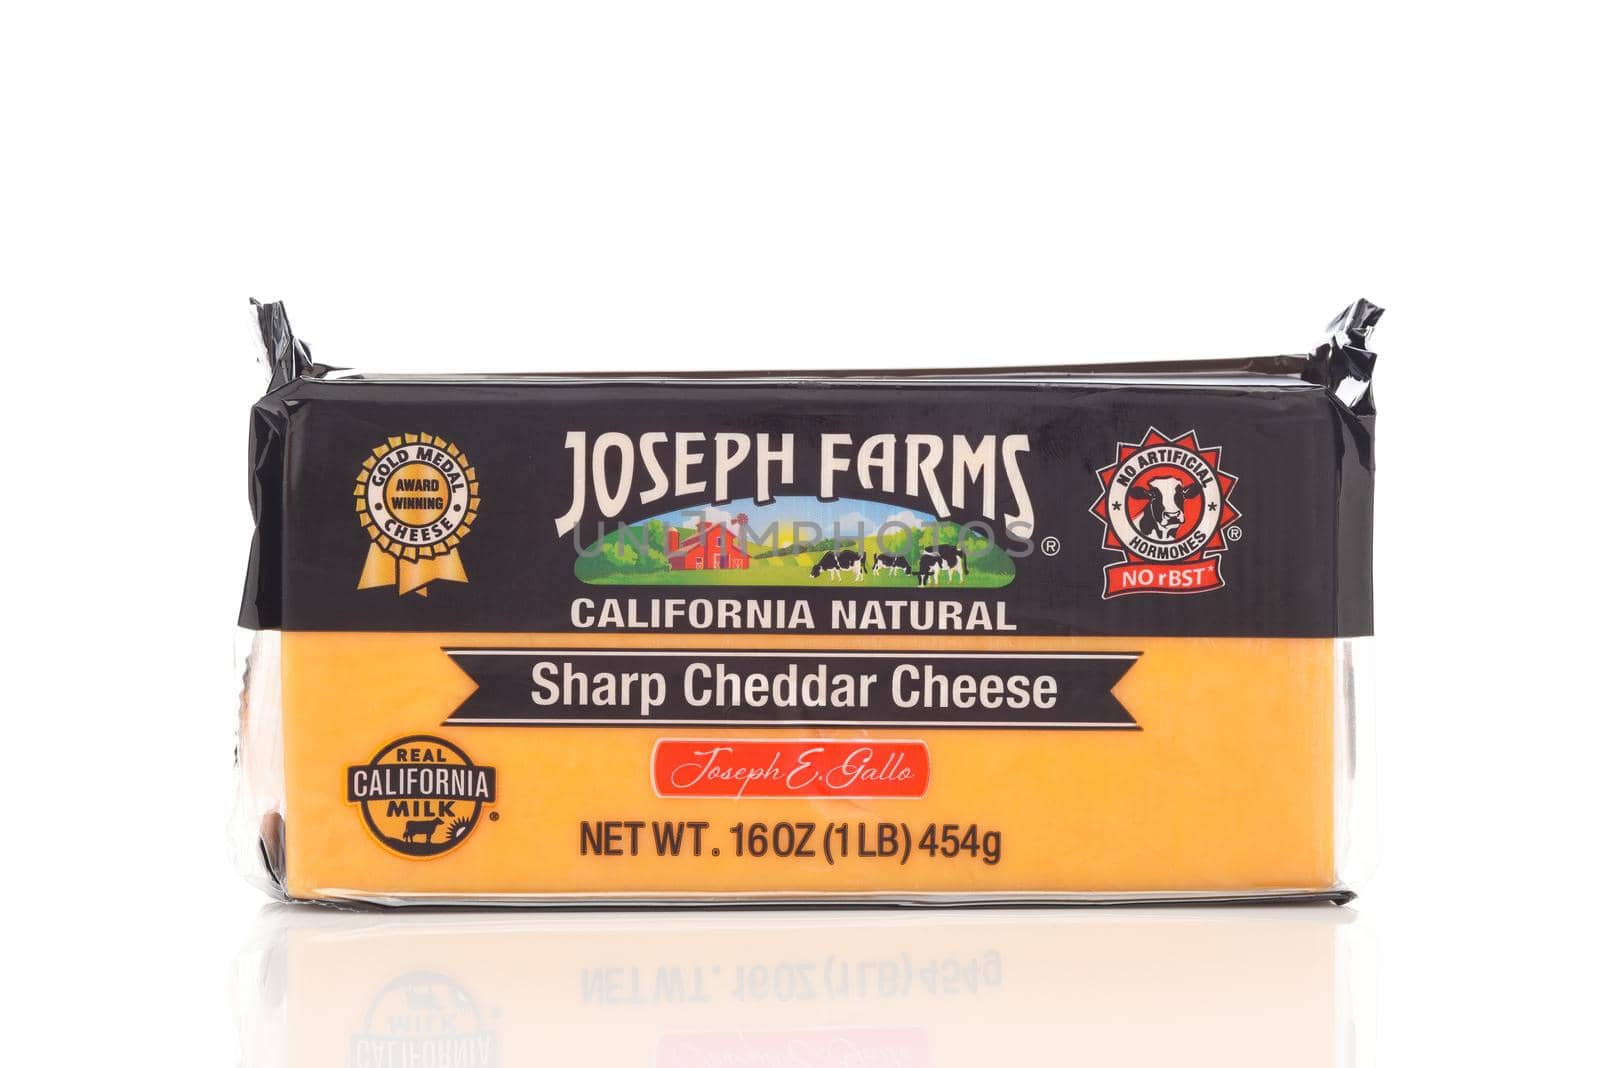 A 16 ounce package of Joseph Farms California Natural Sharp Cheddar Cheese. by sCukrov